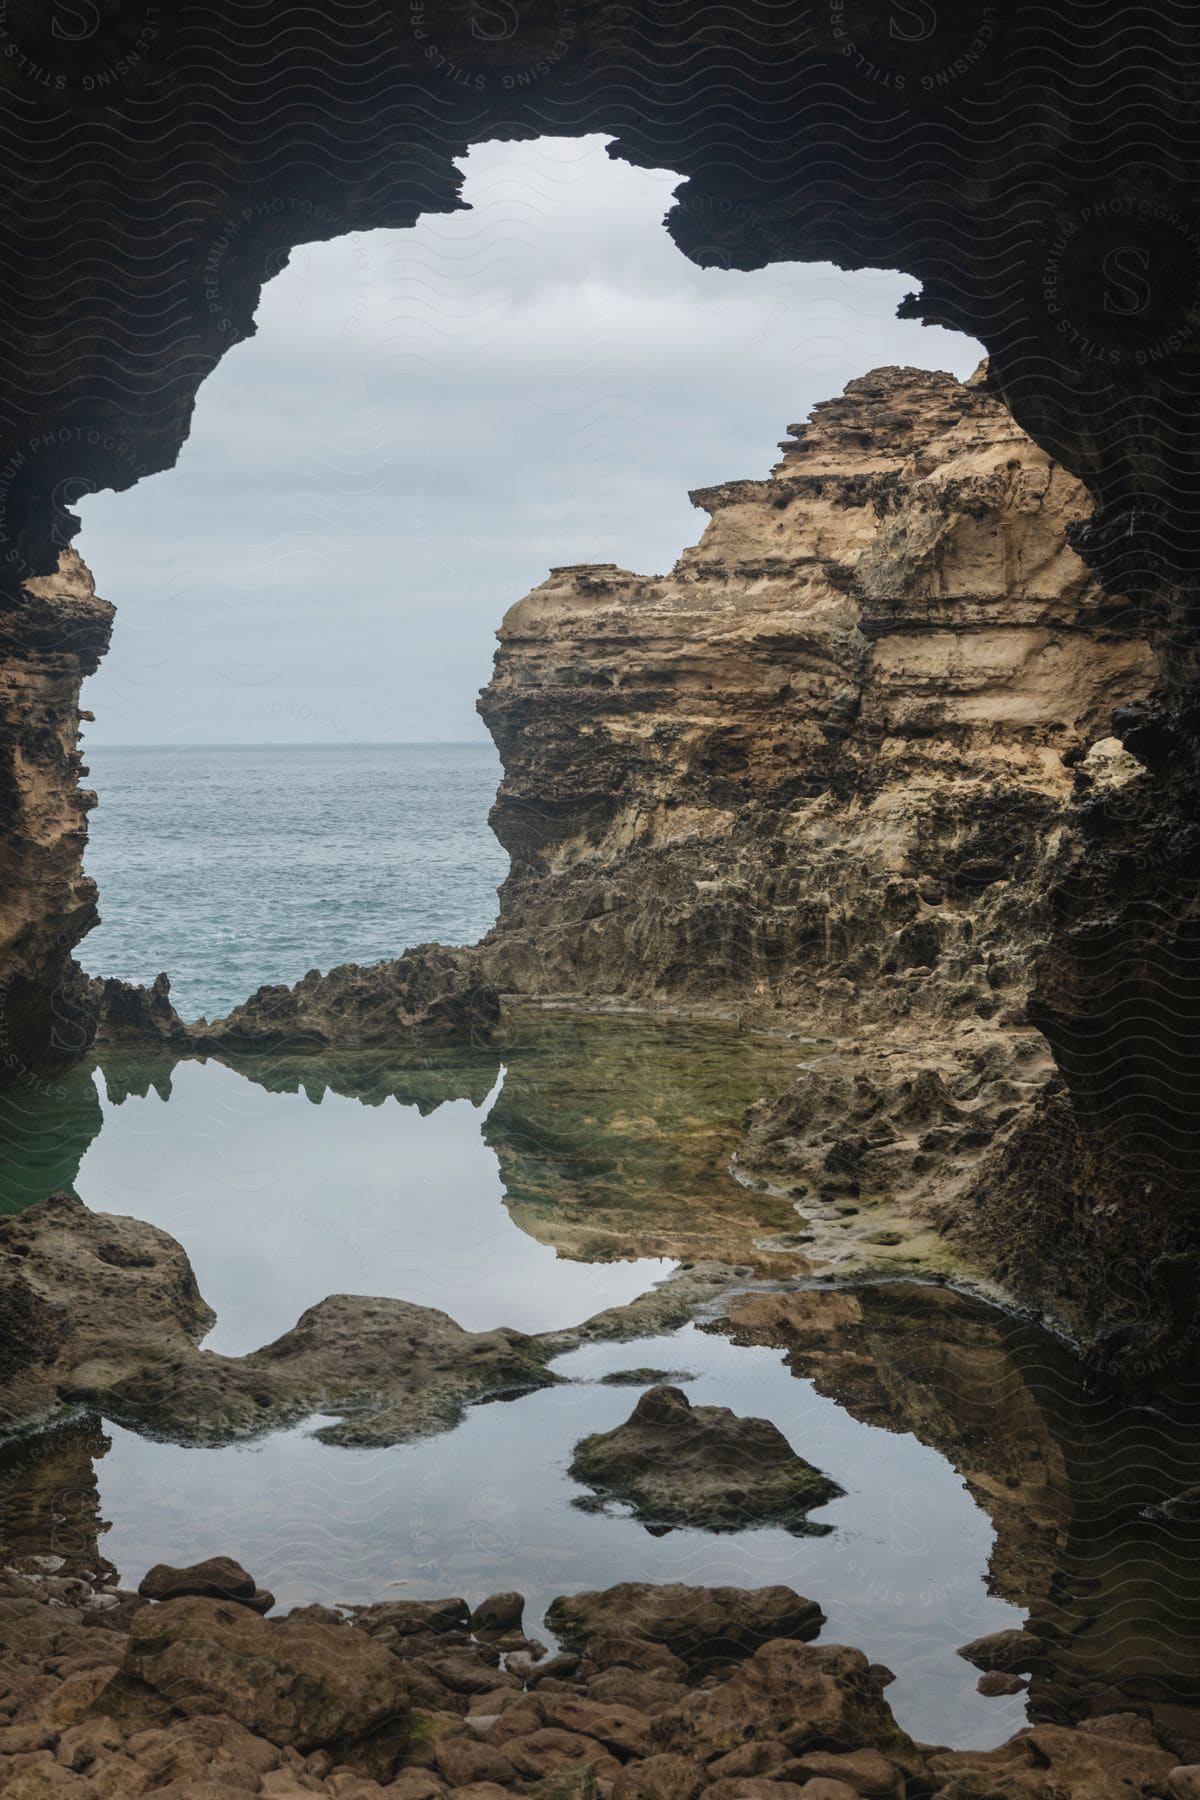 View through a cave along the coast with rock formations in the water